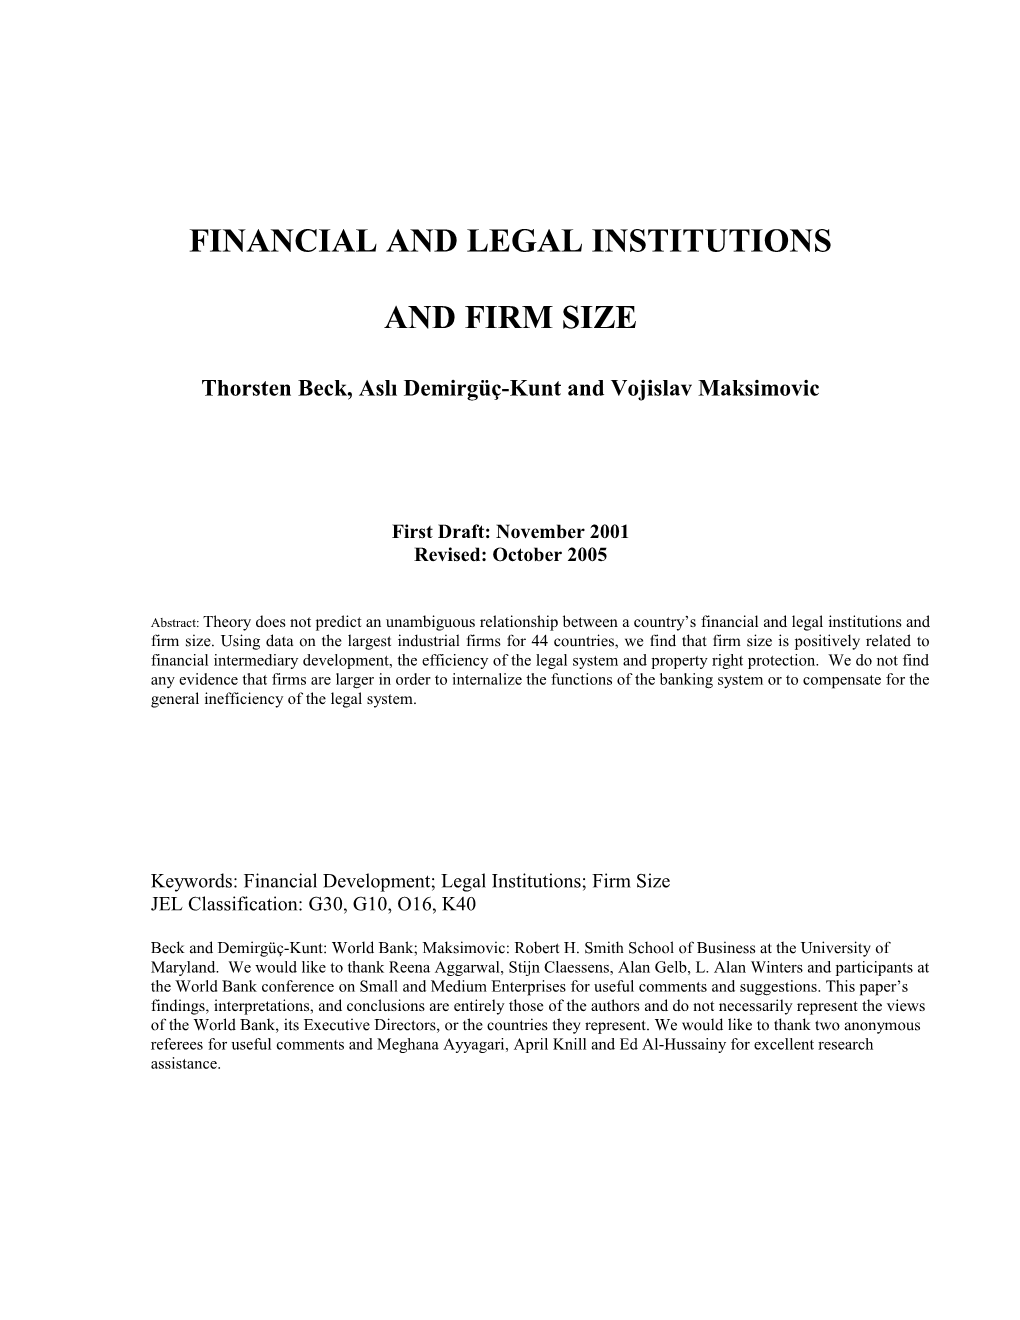 Financial and Legal Institutions and Firm Size